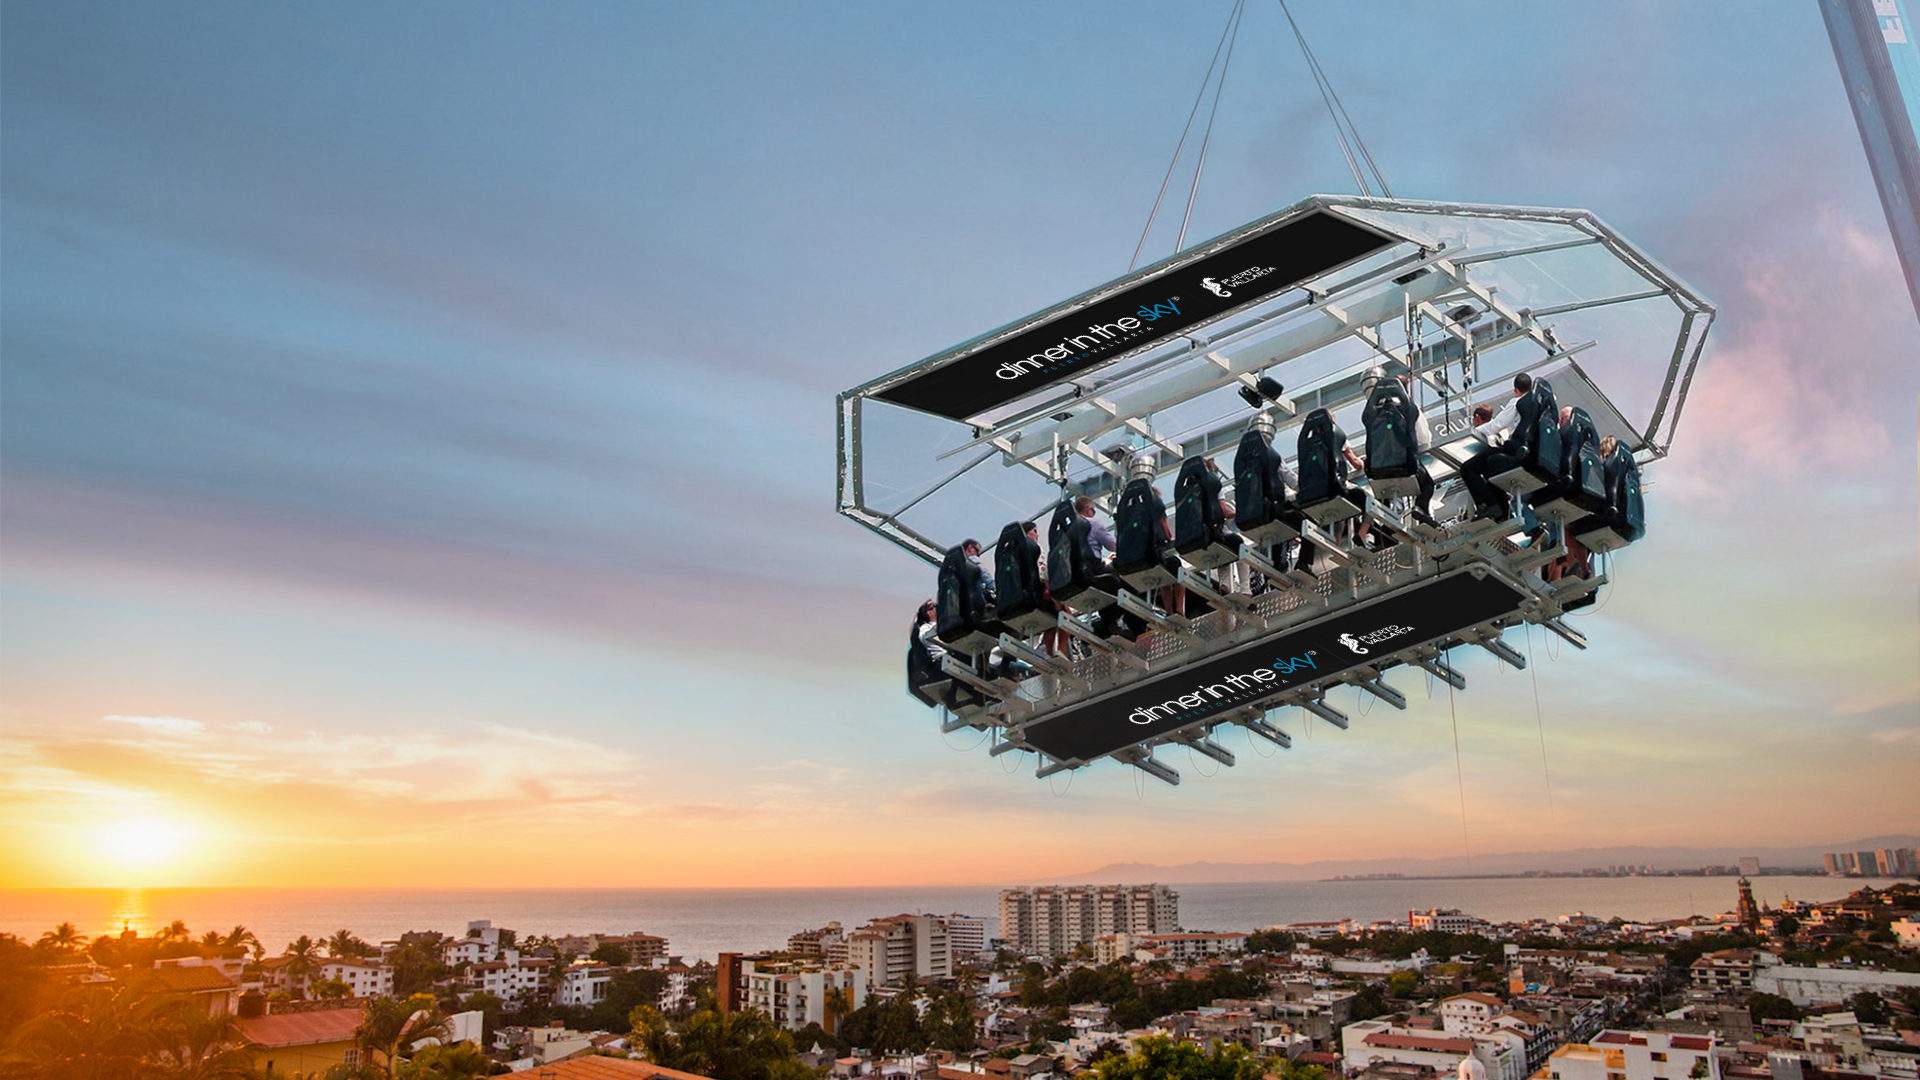 New Dates Have Been Announced for Dinner in the Sky